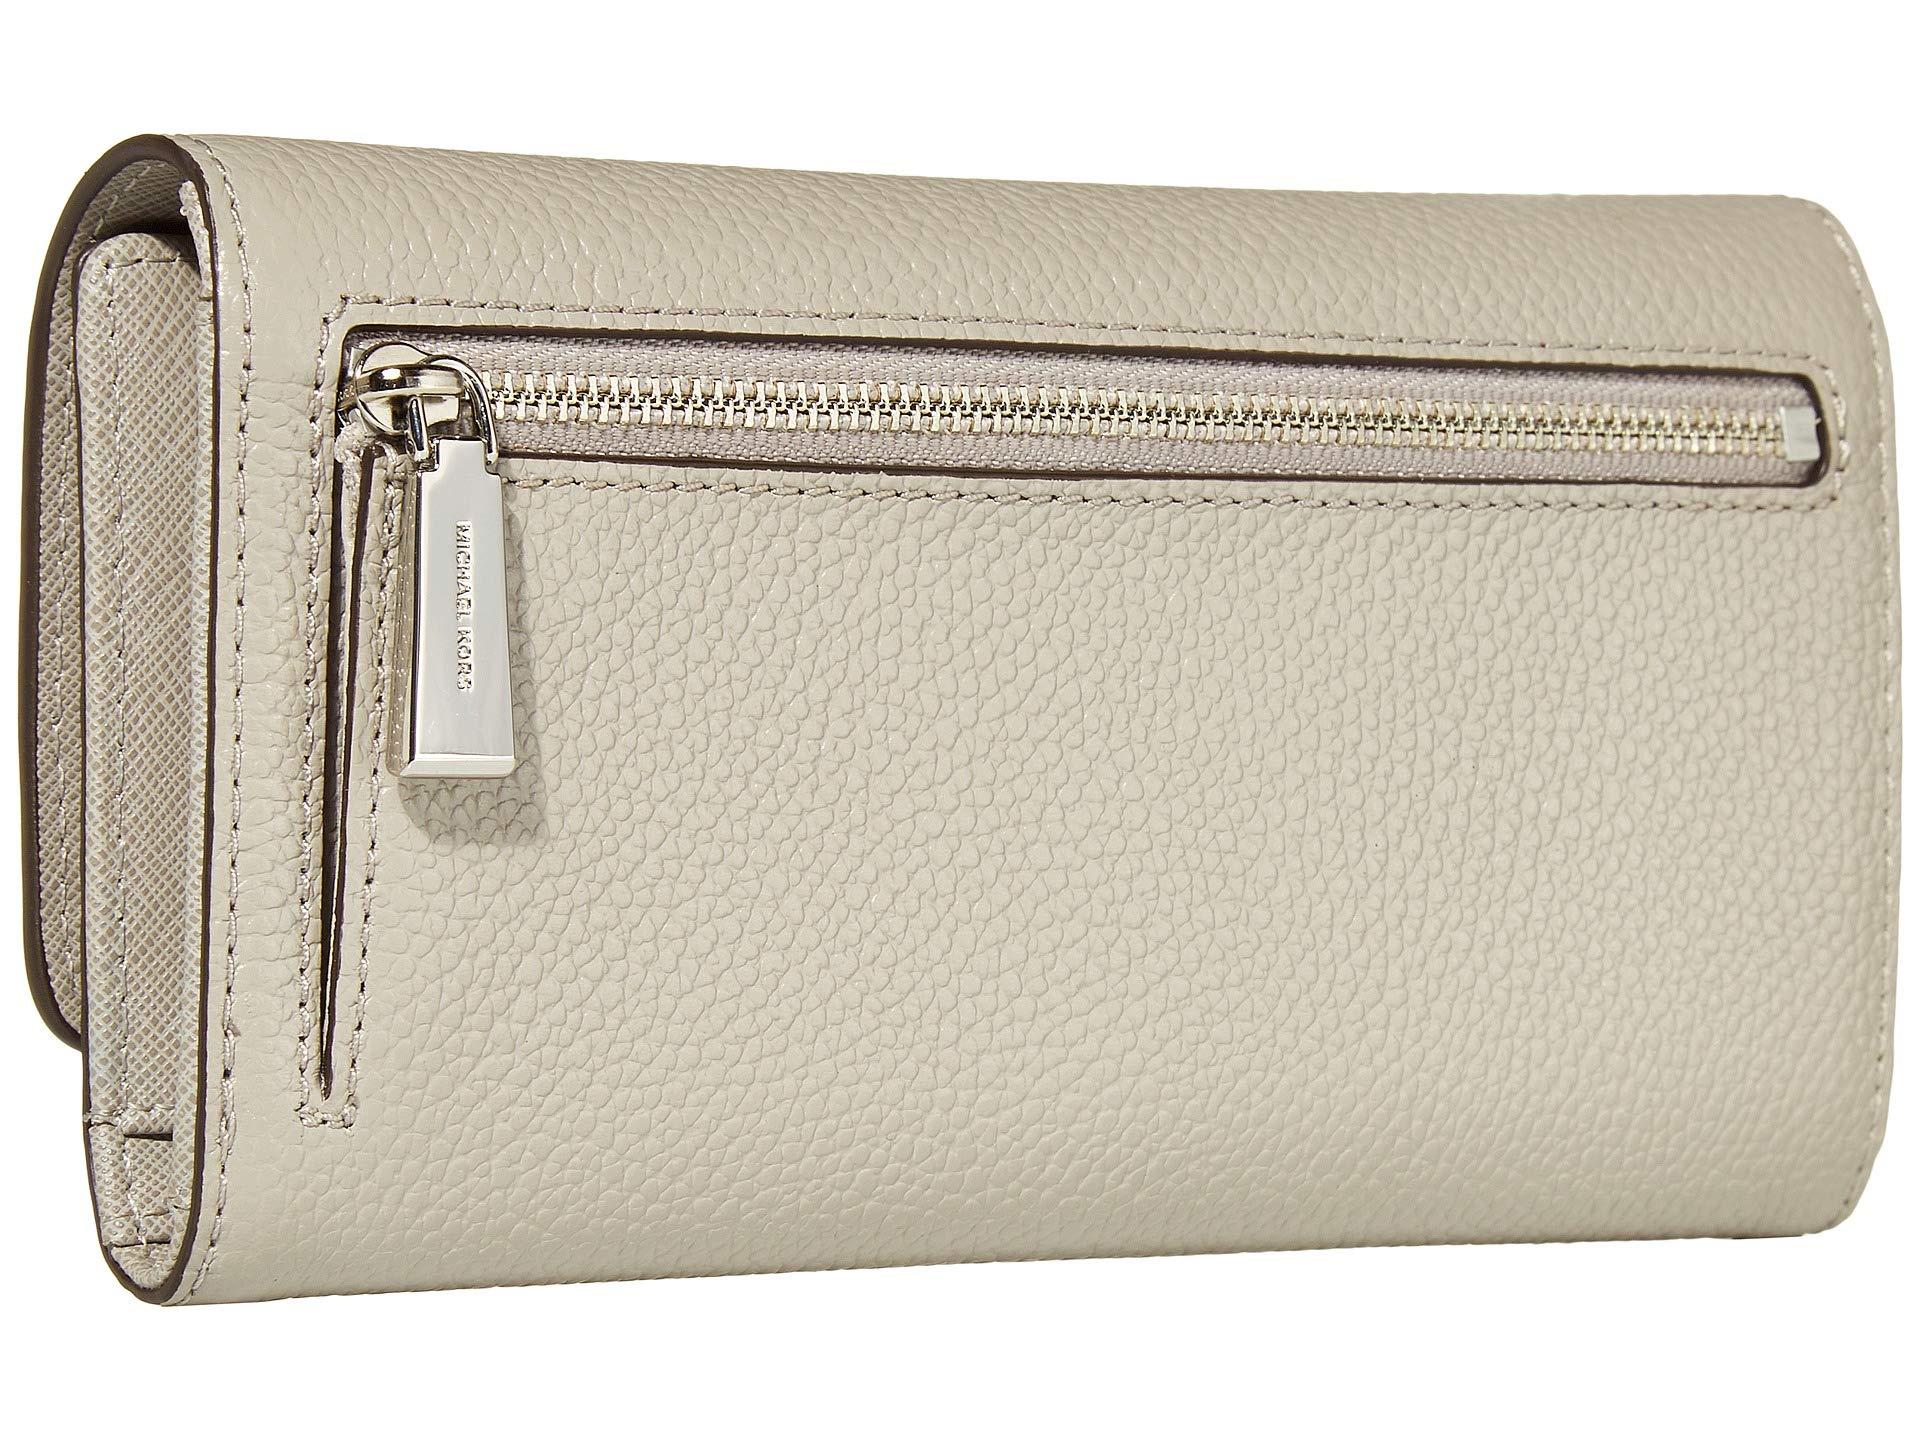 Michael Kors Jet Set Large Trifold Wallet in Gray | Lyst